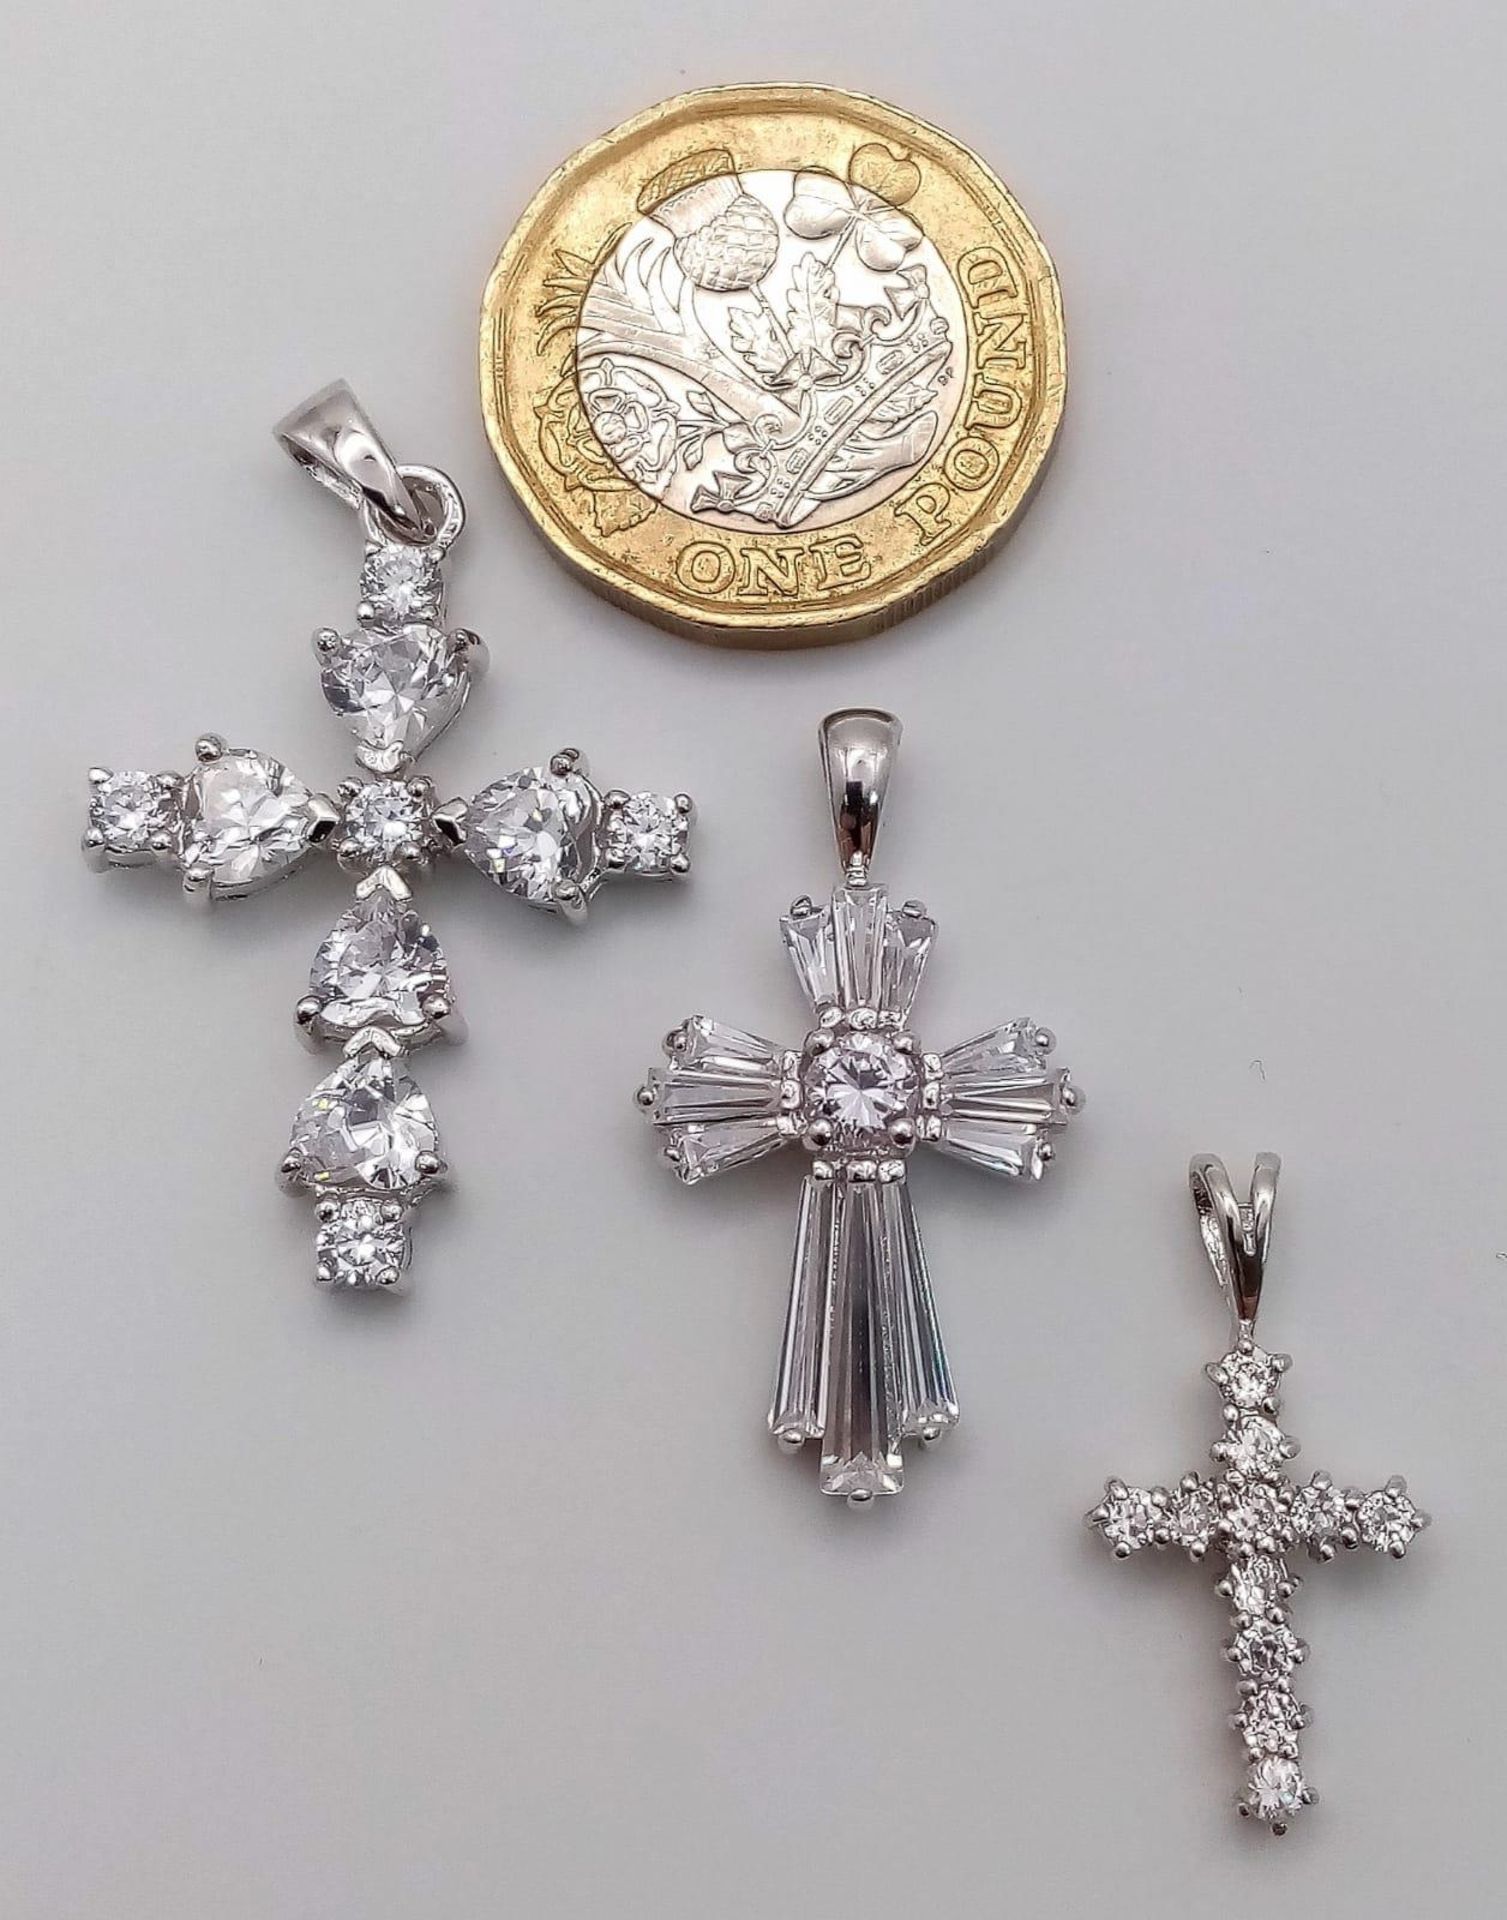 3 X STERLING SILVER STONE SET CROSSES PENDANTS, WEIGHT 8.1G, SEE PHOTOS FOR DETAILS - Image 10 of 12